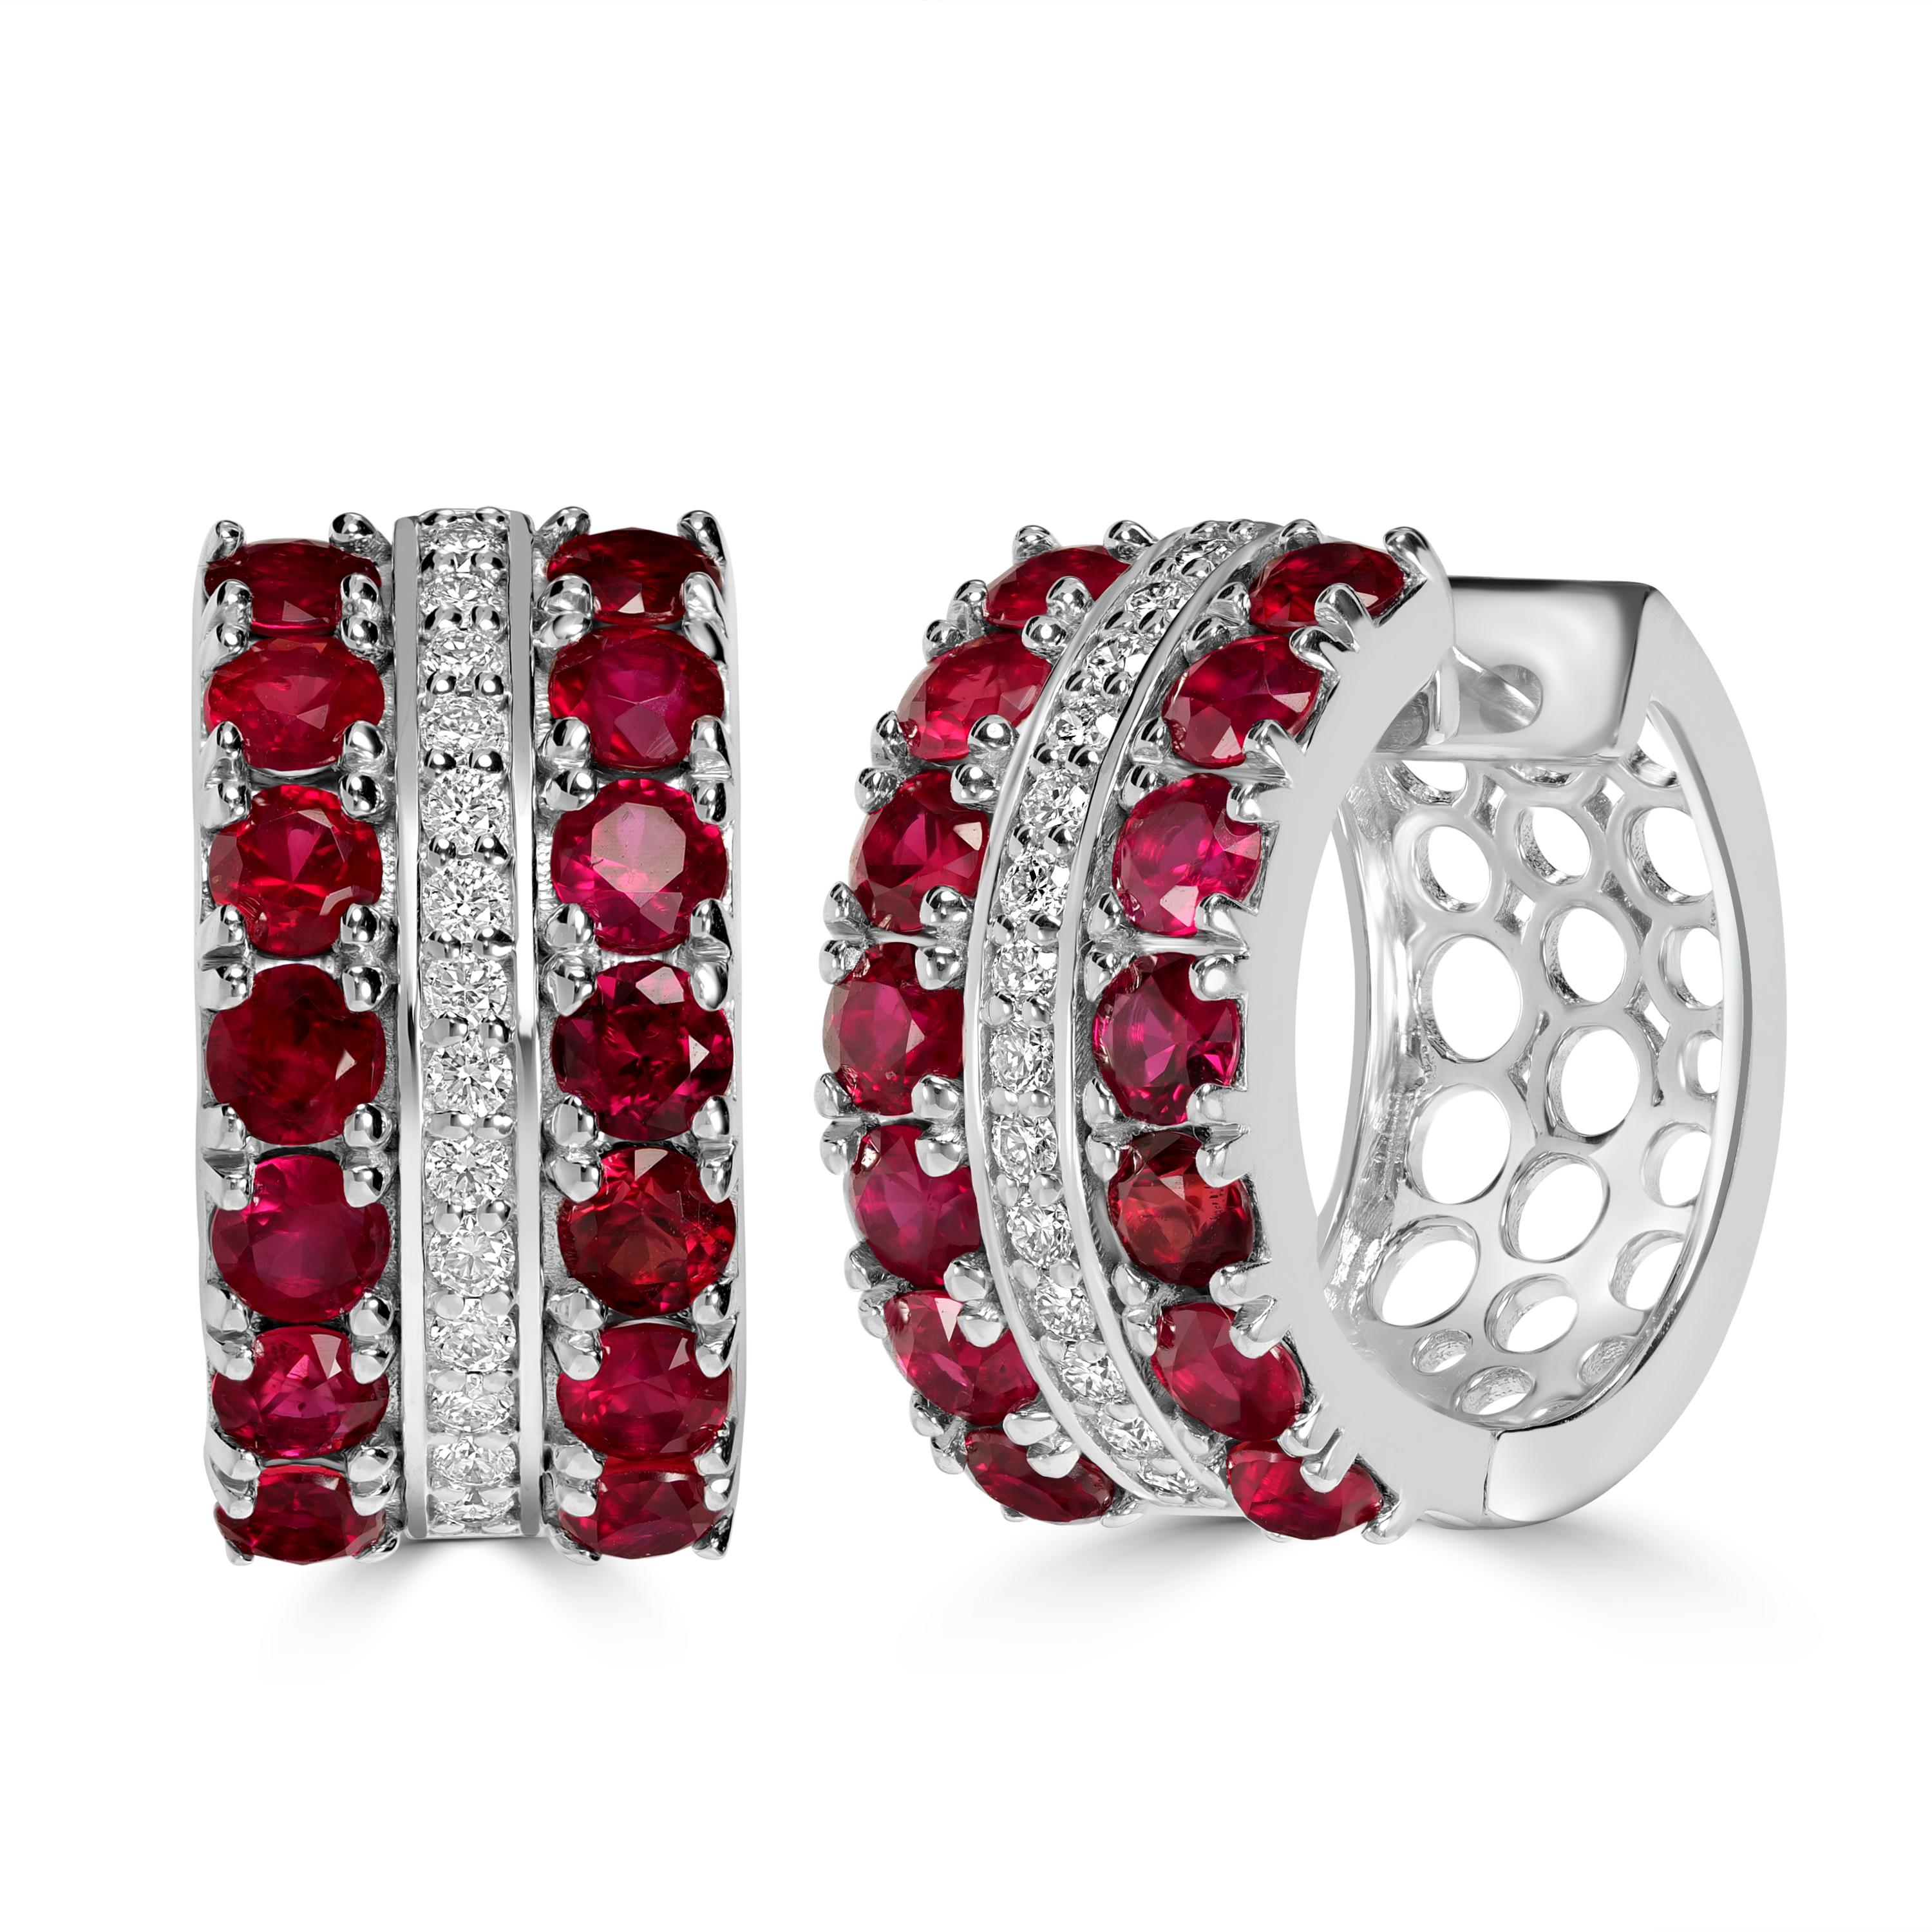 Designed in the heart of New York City, we present to you our 4.74 Carats Rubies and Diamonds Cuff Earrings made in 18k White Gold. This piece of earring consists of non commercial quality rubies and diamonds meaning we used high value and high